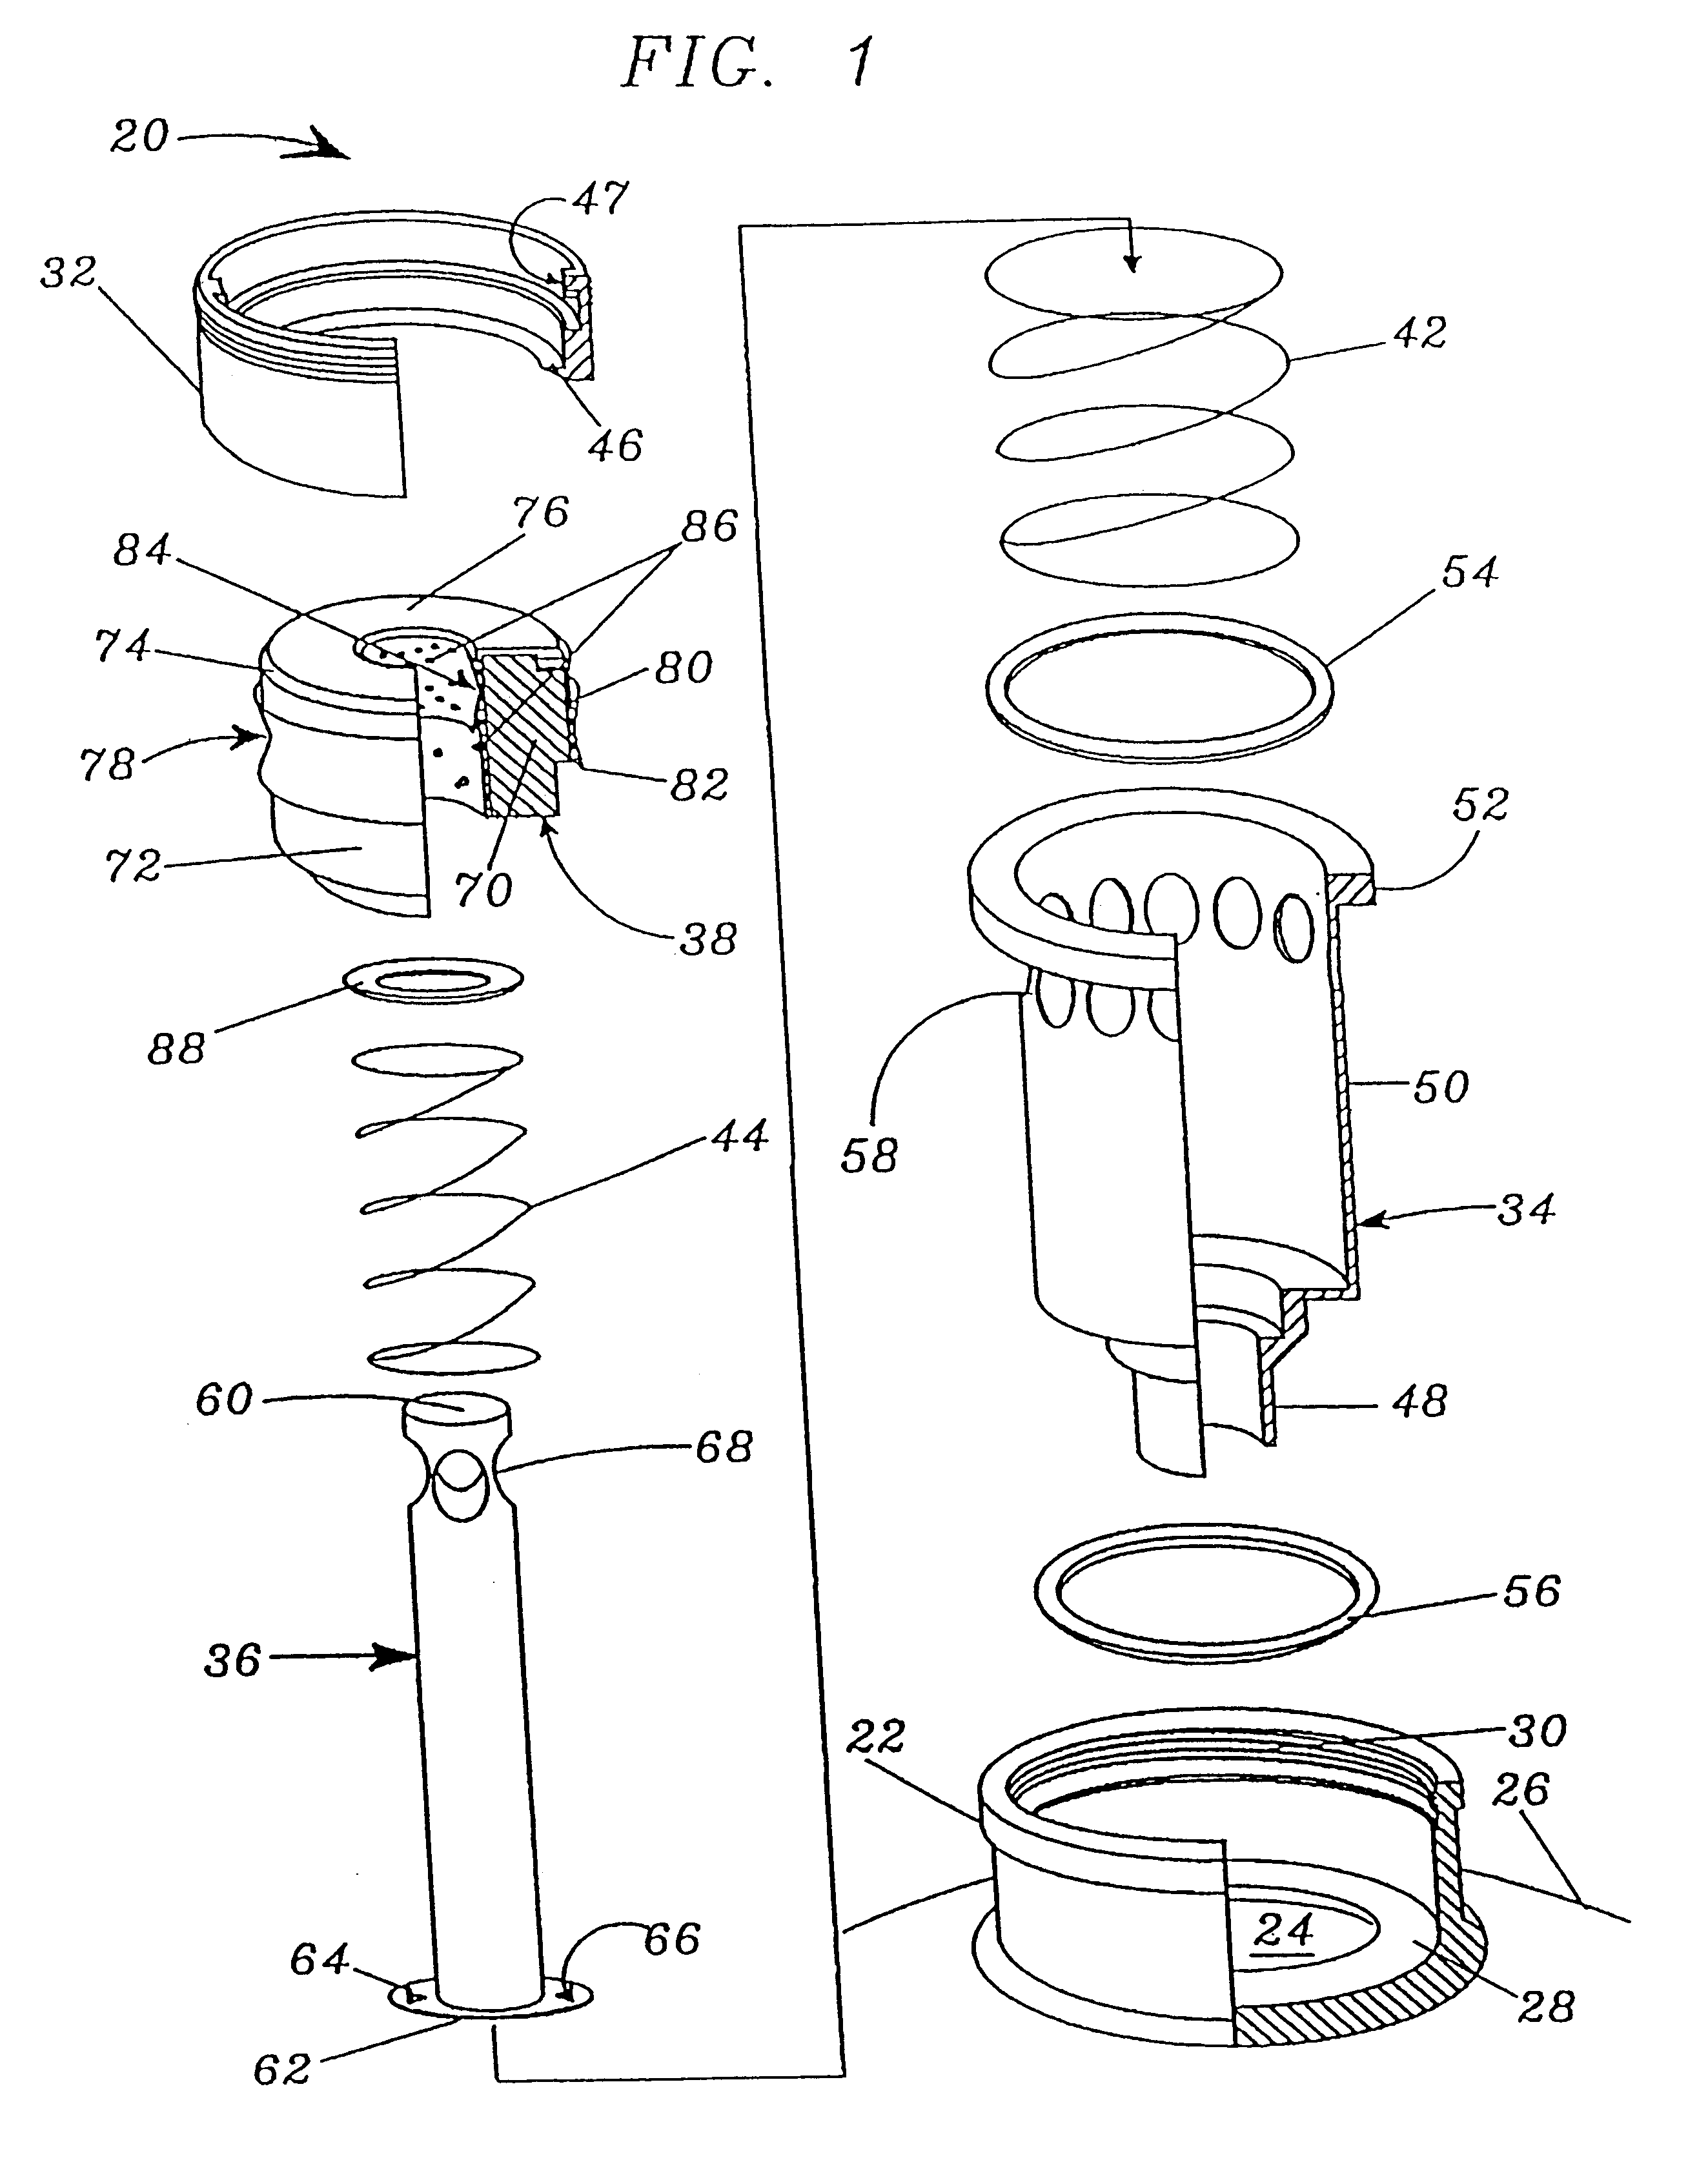 Valve assembly for controlling fluid ingress and egress from a transportable container which stores and distributes liquid under pressure